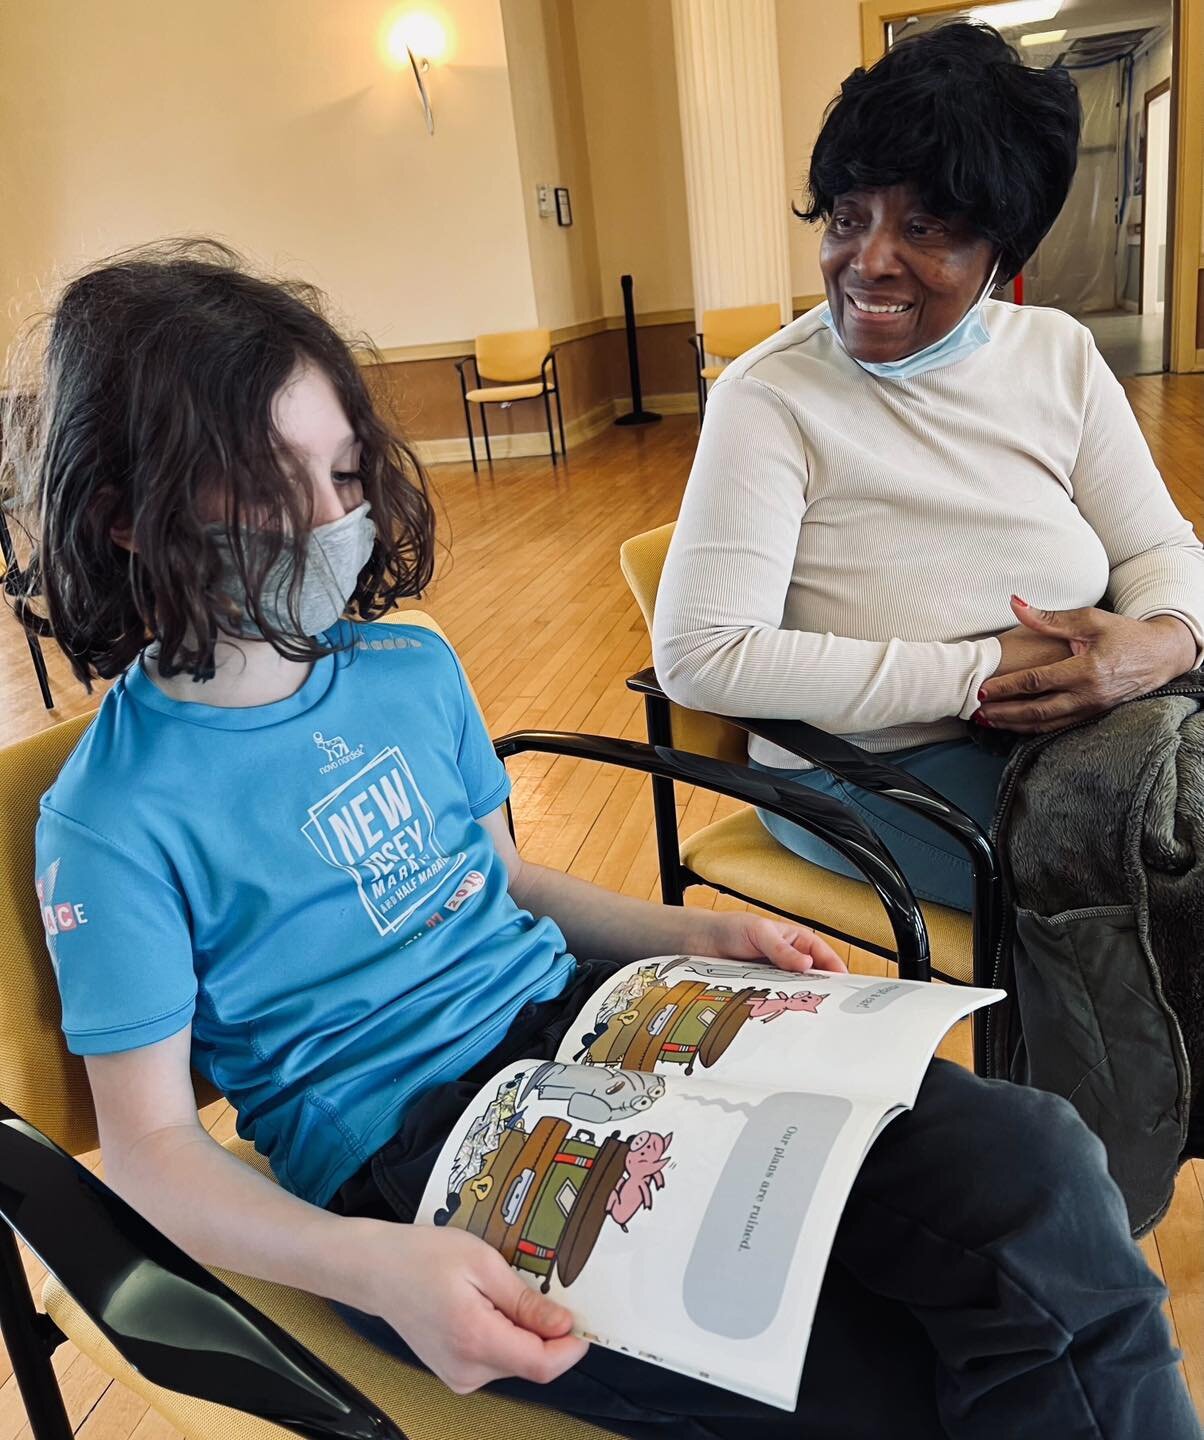 Bridging the gap between generations one book at a time! Our intergenerational learning program fosters connections, empathy, and understanding across generations! #intergenerationallearning #readingwithgrands #hudsonlabschool #communityconnections #